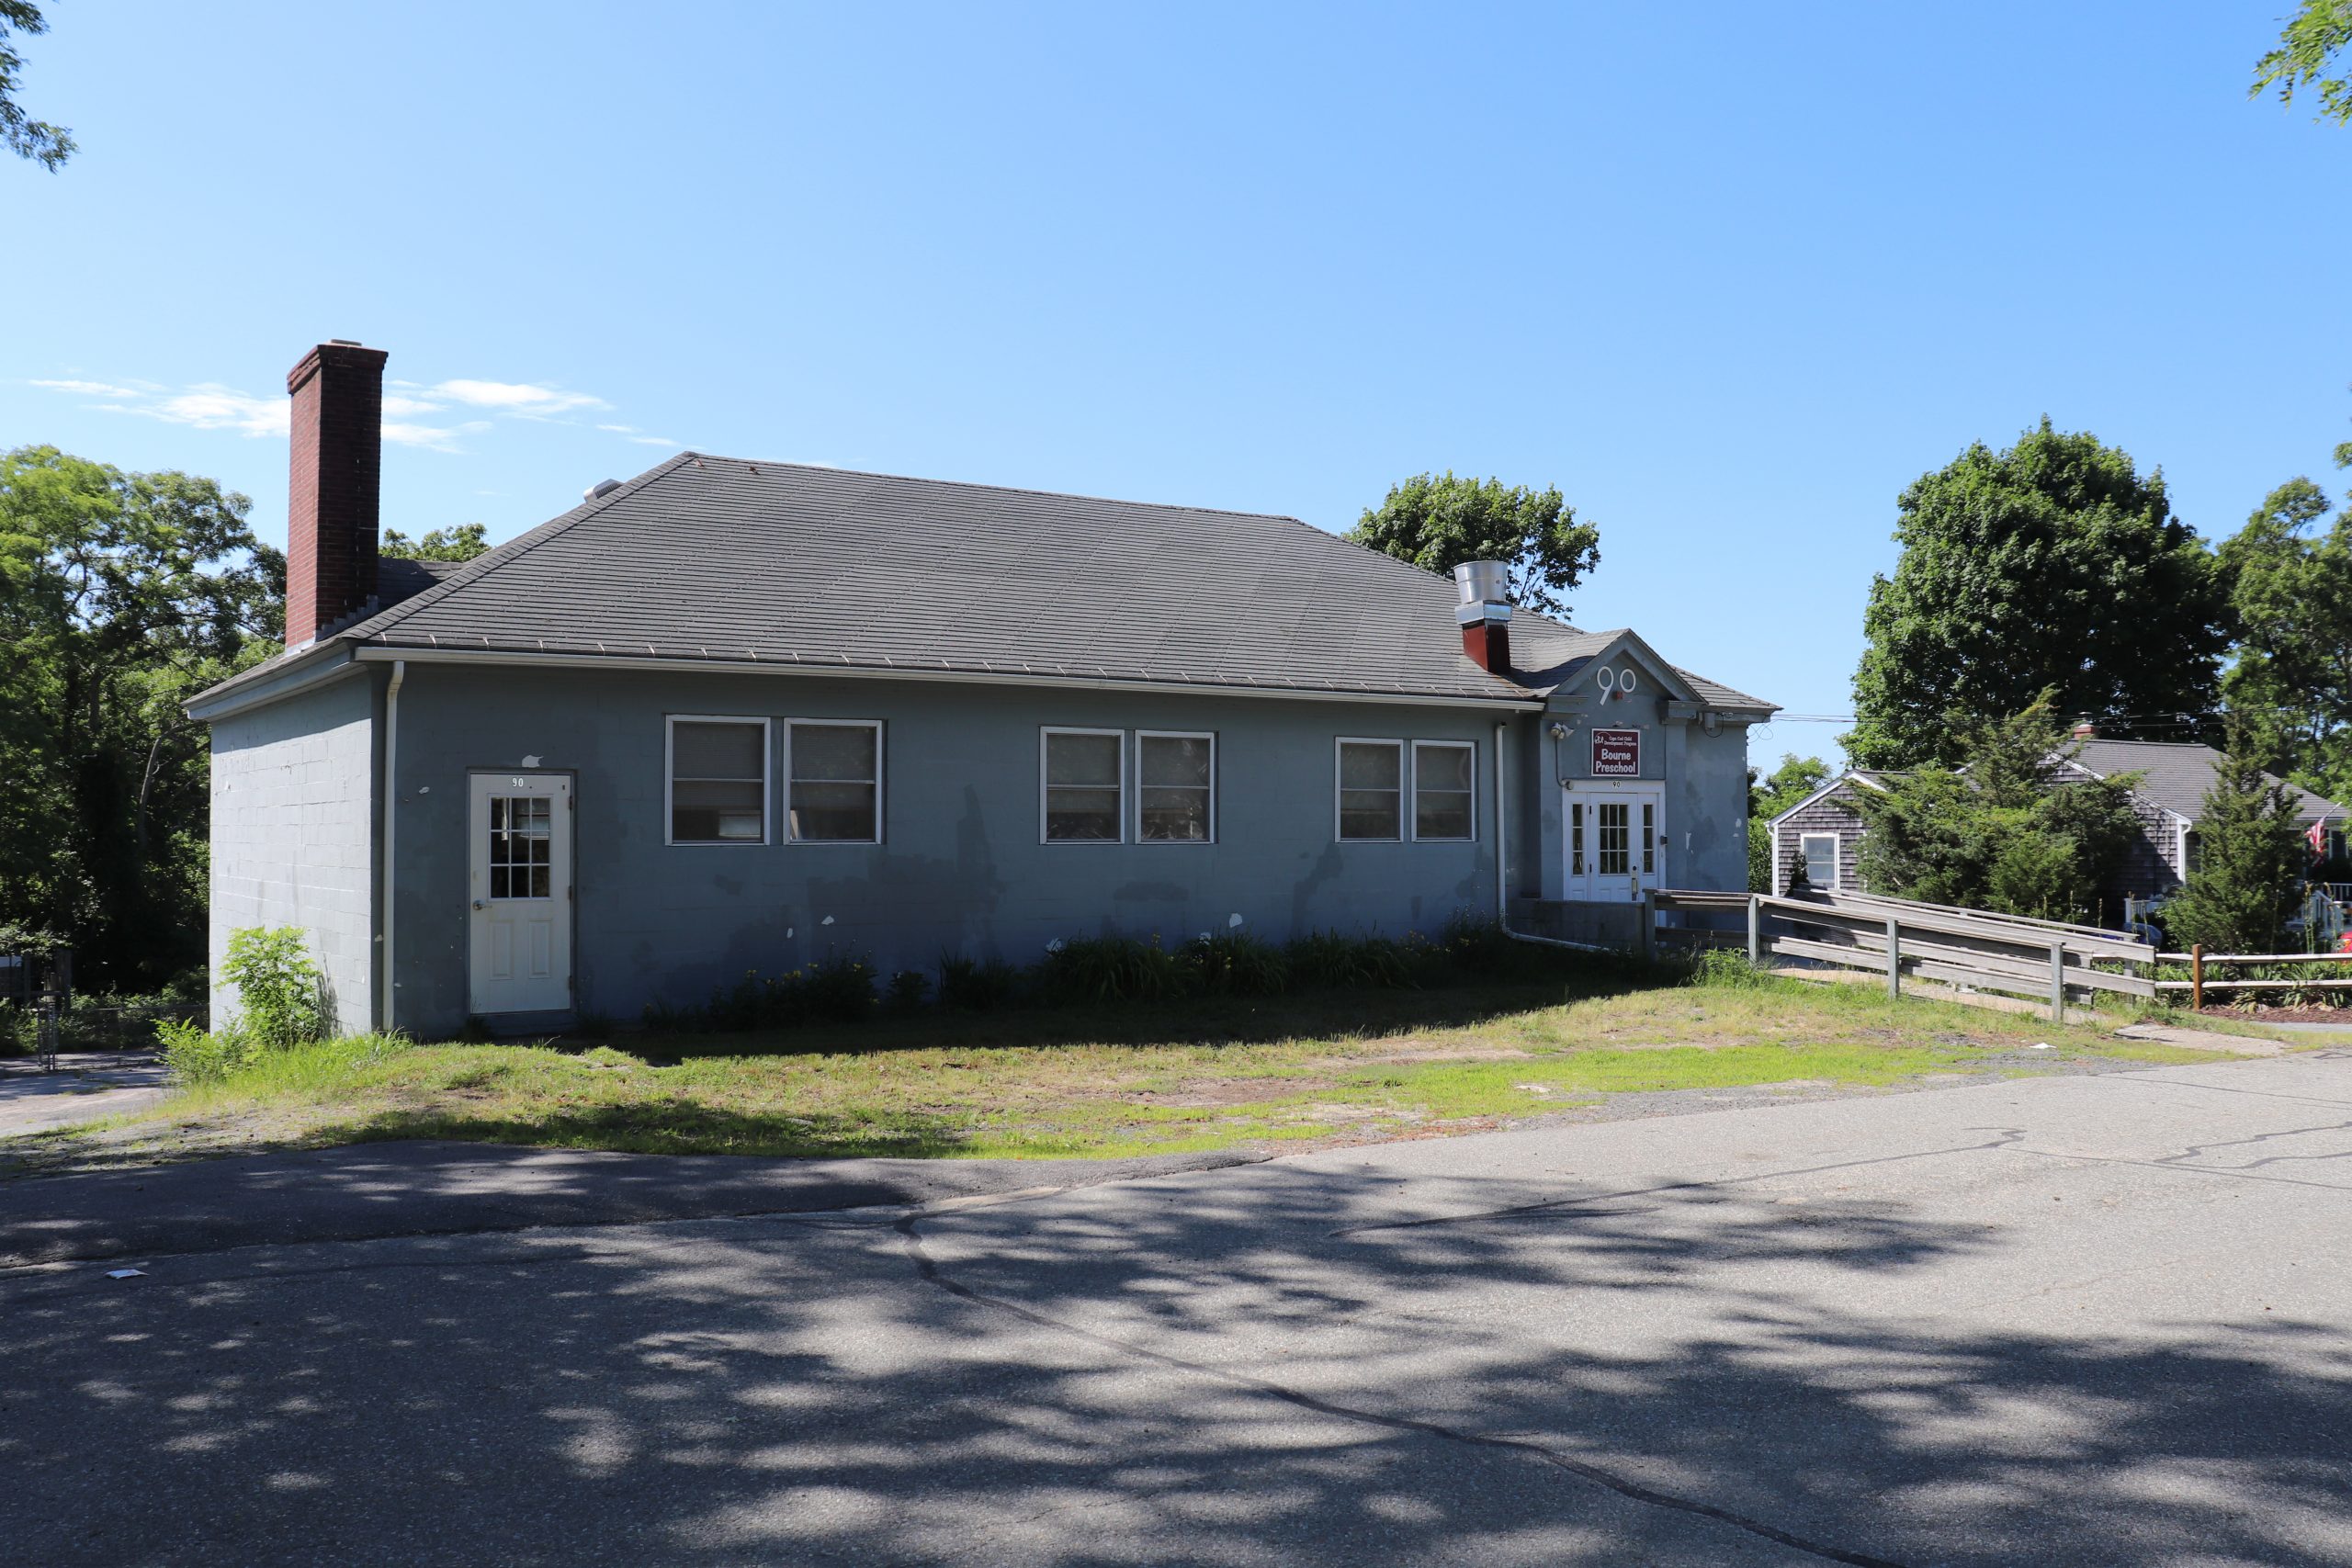 Commerical Property For Lease – 90 Adams St Bourne MA